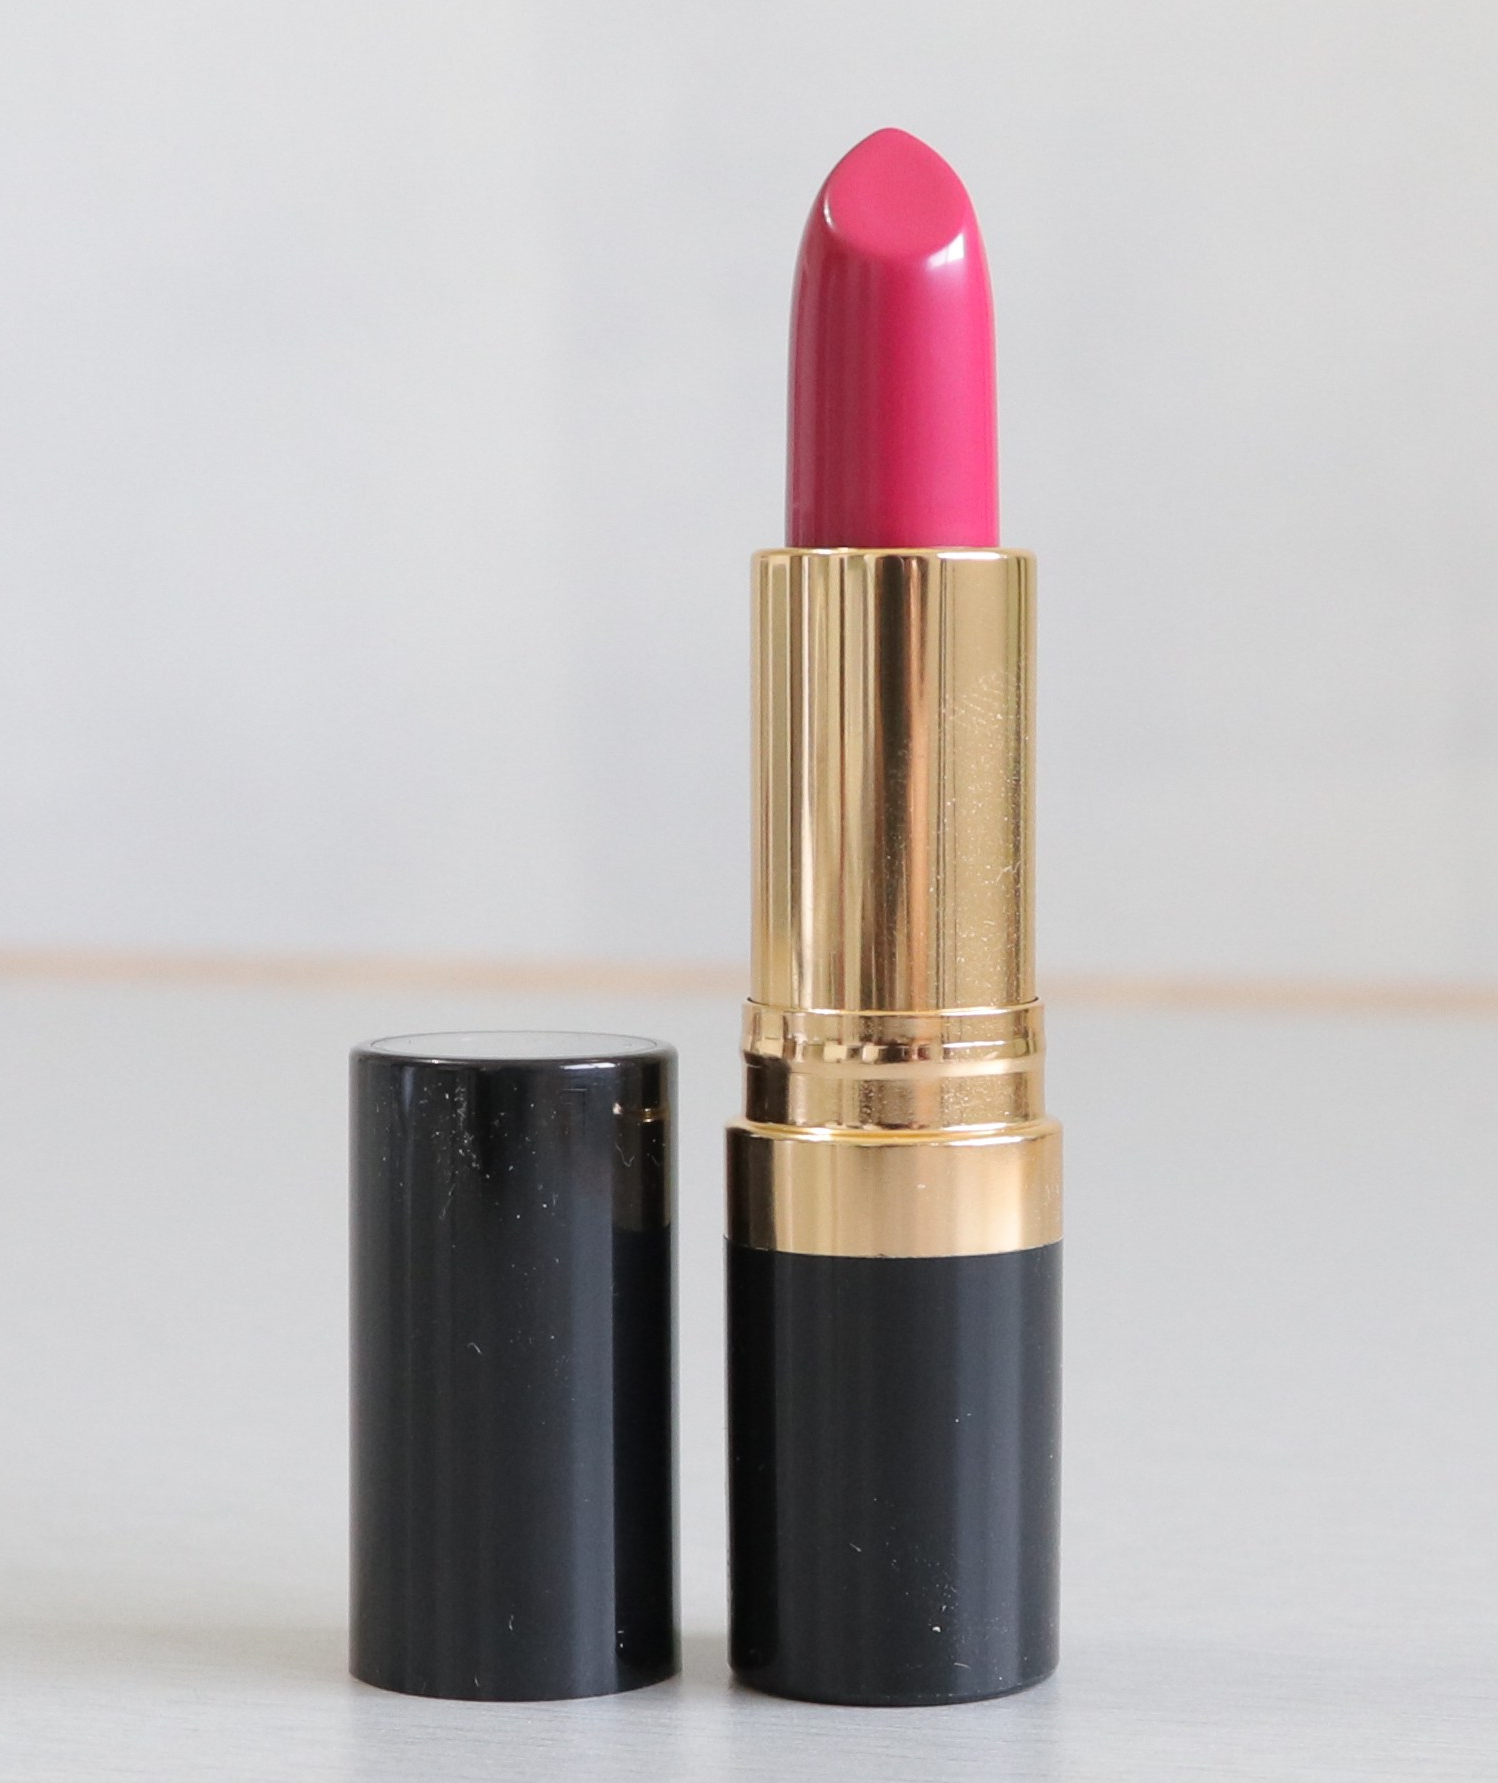 Revlon Super lustrous Lipstick in the shade Cherries in the Snow